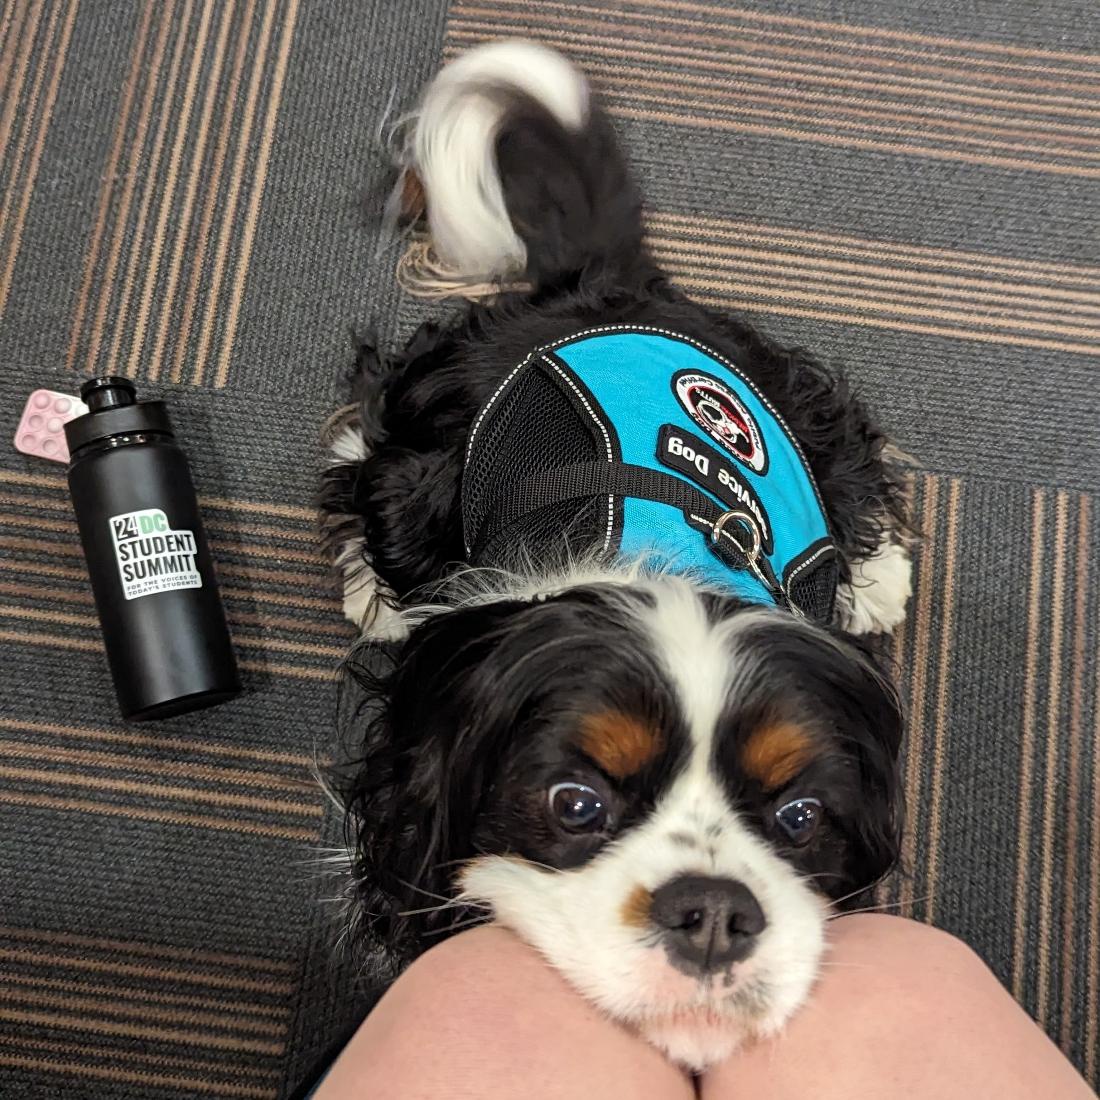 Even pups have a place on the Hill. Meet Maverick.

Causes he cares about: access to #highered, basic needs, + mental health support for #TodaysStudents

Favorite pastime: hanging on Capitol Hill w/ his mama, parenting student Jennifer Shirk  

Likes: TREATS

#DCStudentSummit